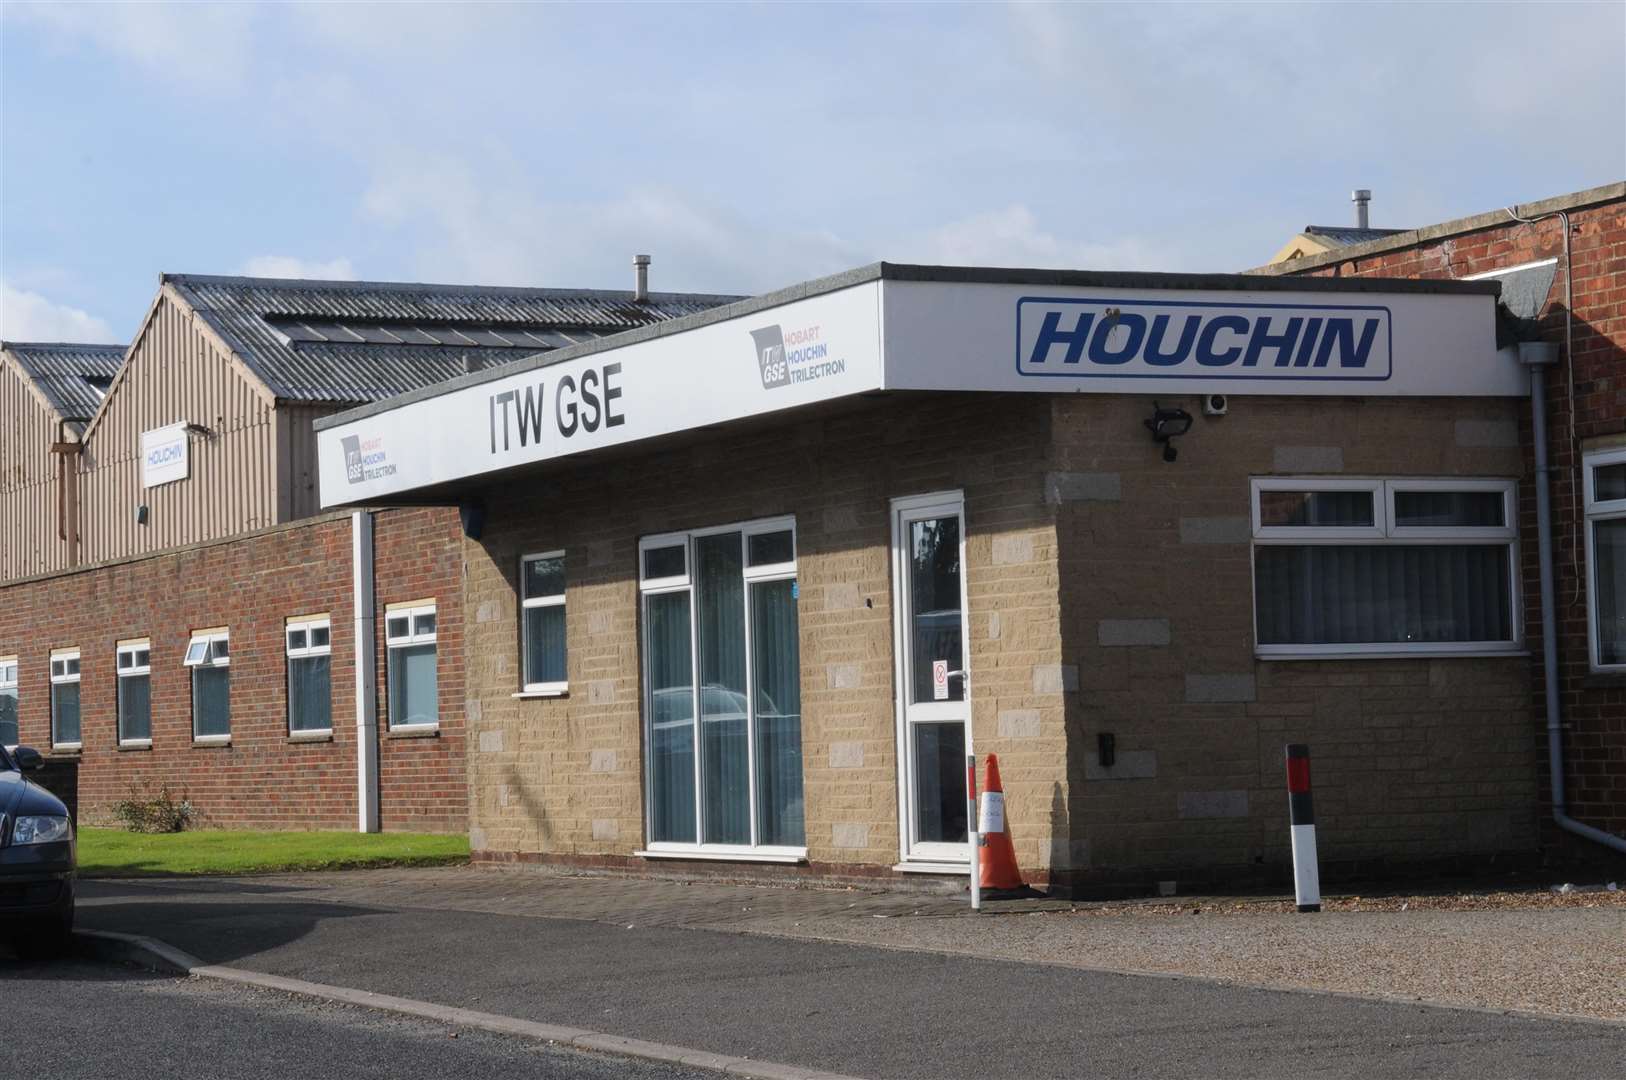 The Houchin site is now set to be demolished